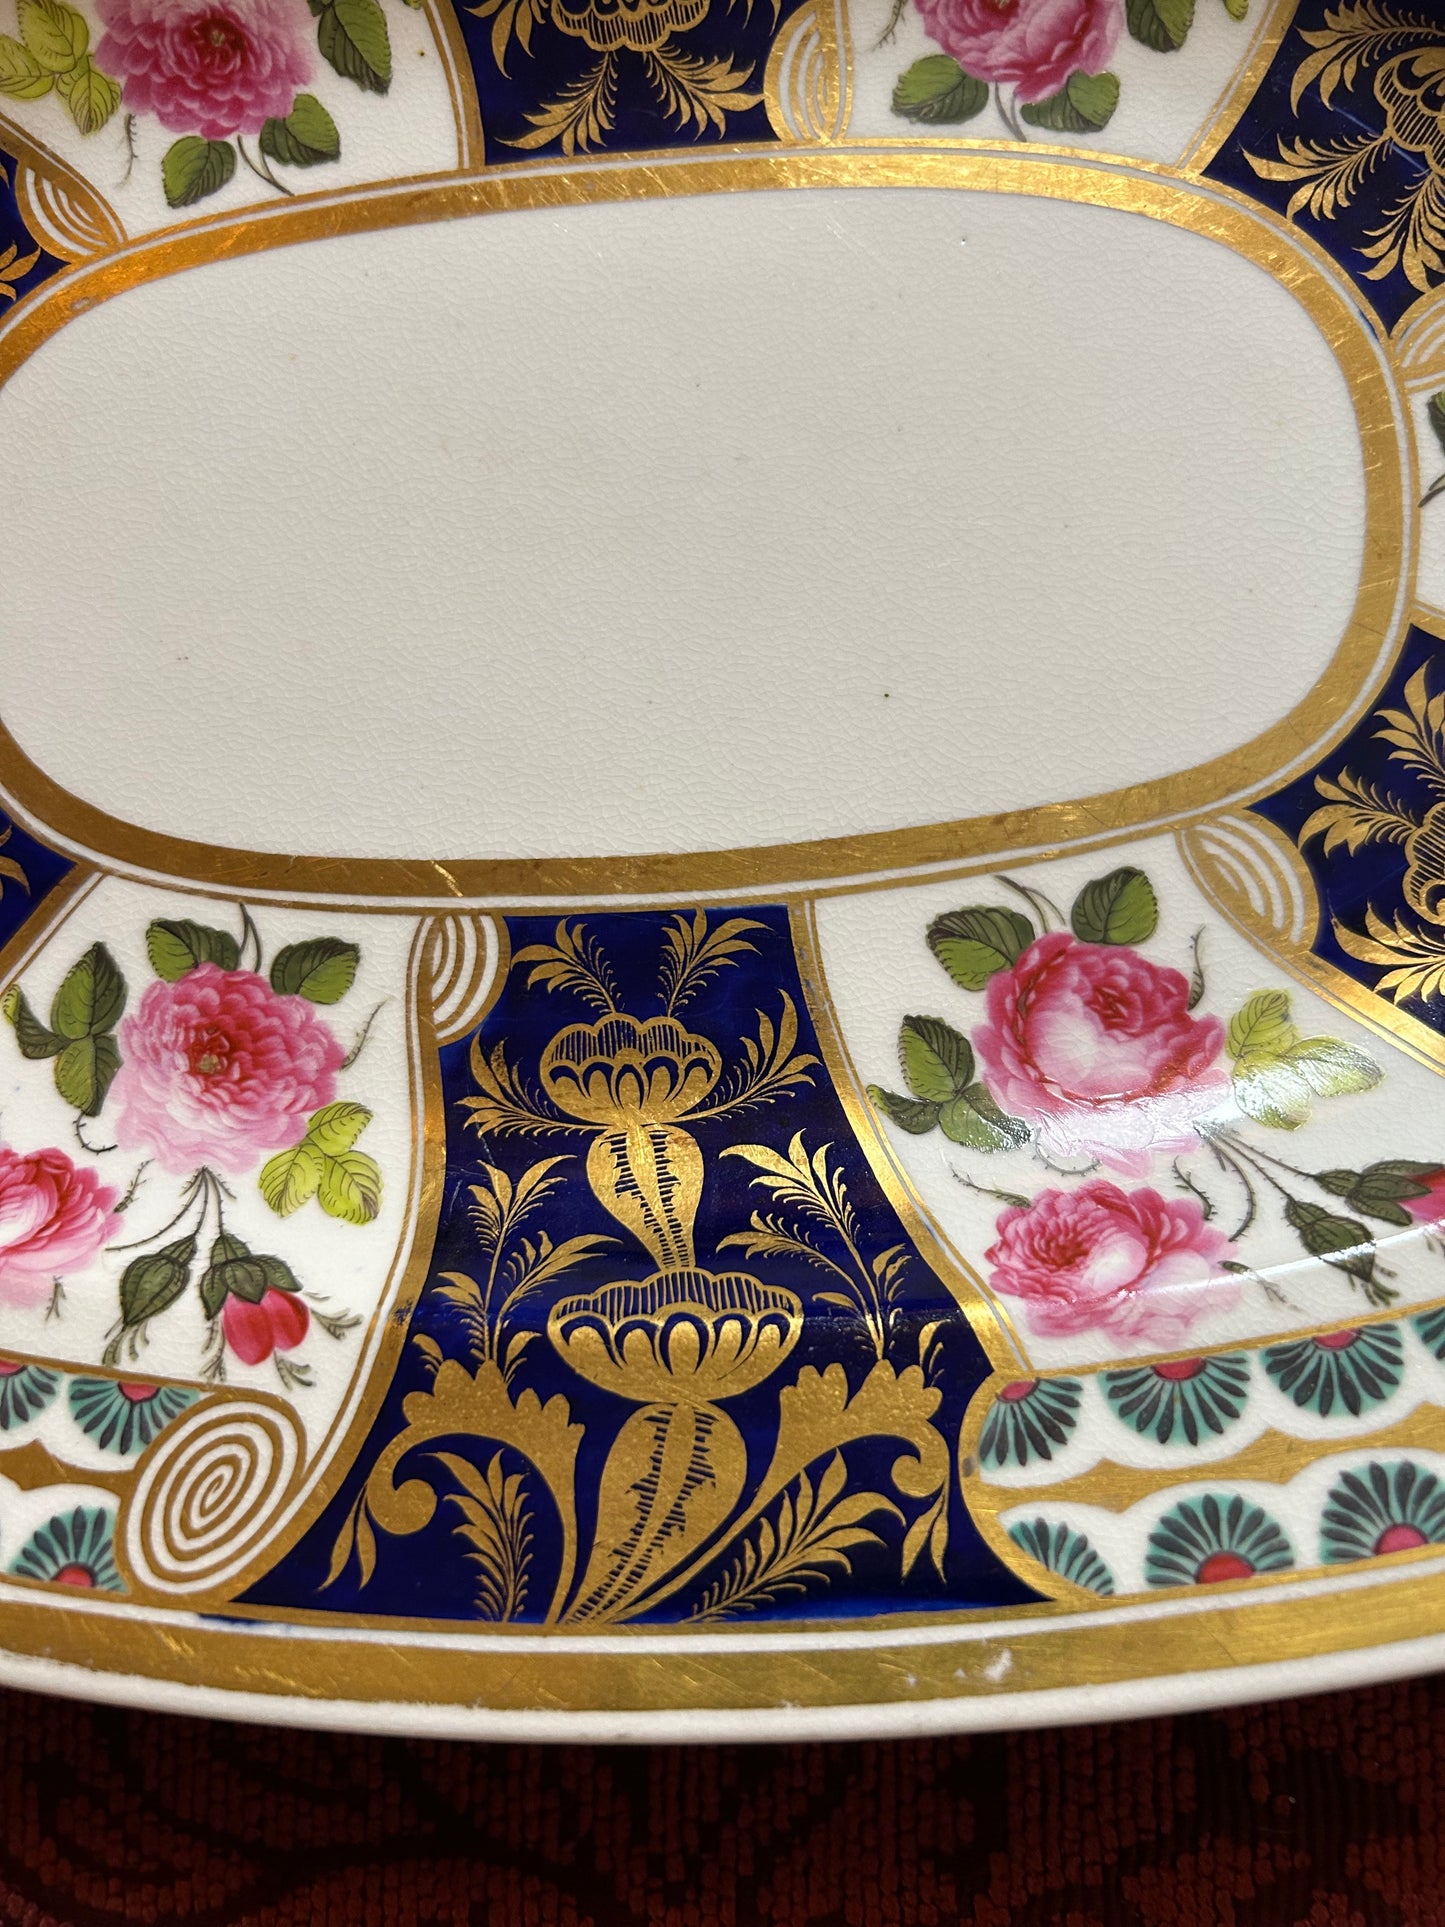 LIVE: Bloor Derby Blue, White, and Hand Painted Roses stunning Platter! C.1830 10 by 13 1/2”